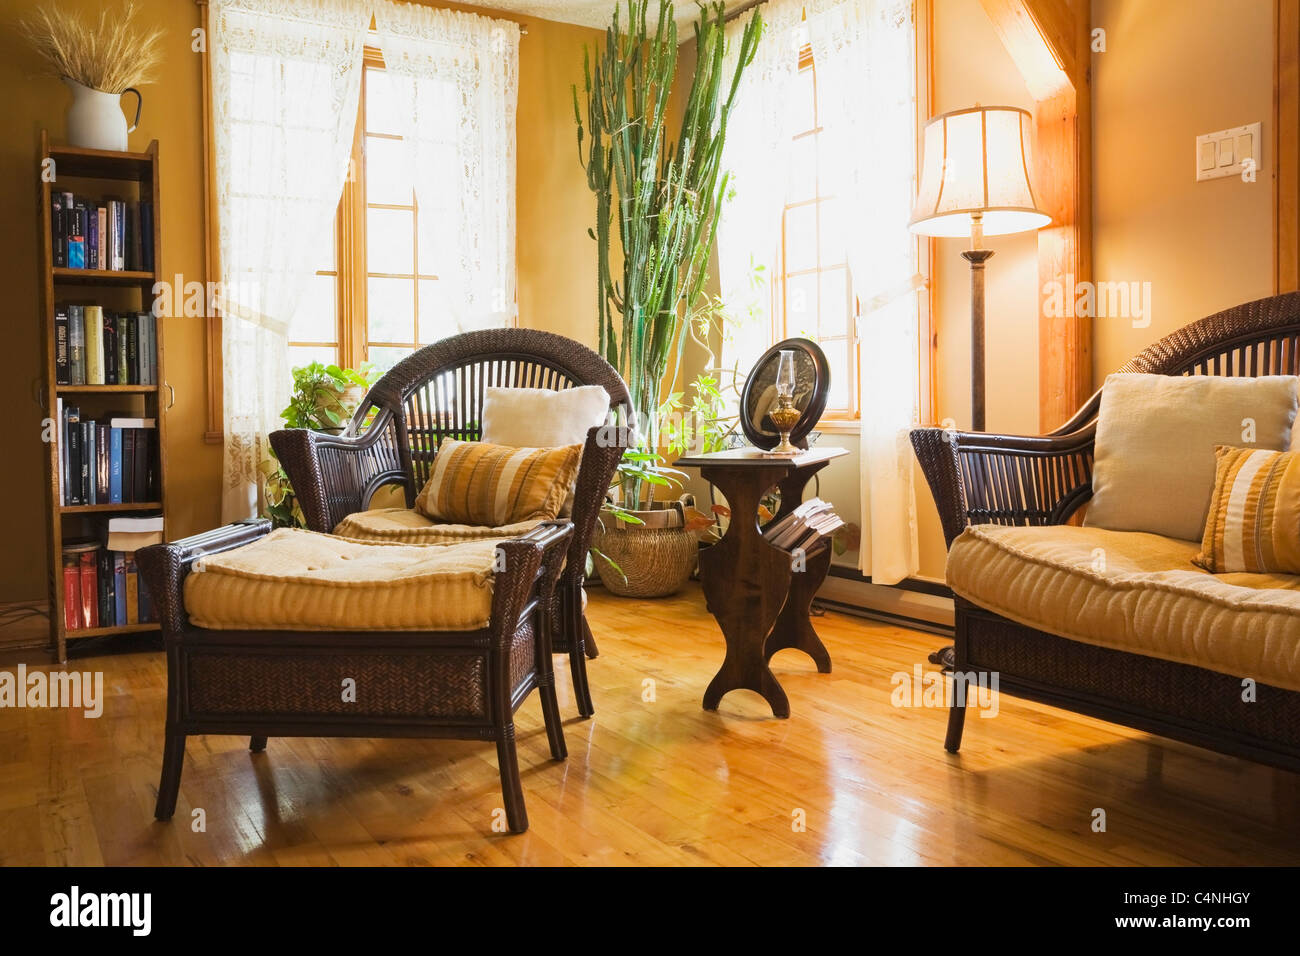 Wicker Furniture In Living Room Of 19th Century Cottage Style Home Stock Photo Alamy